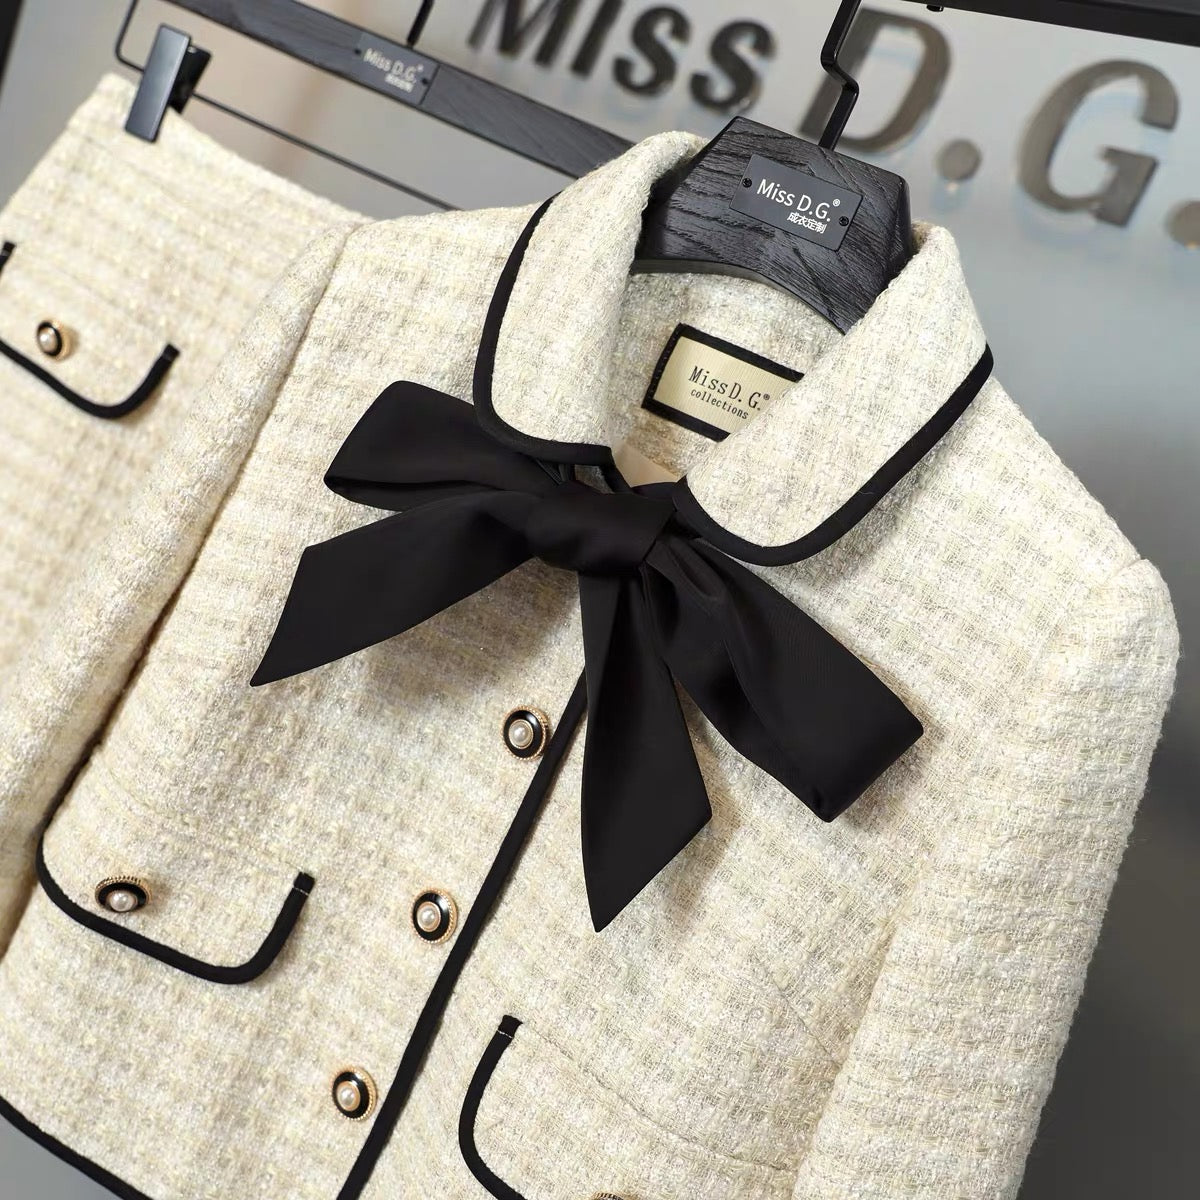 Miss DG small fragrance suit women's early autumn western style